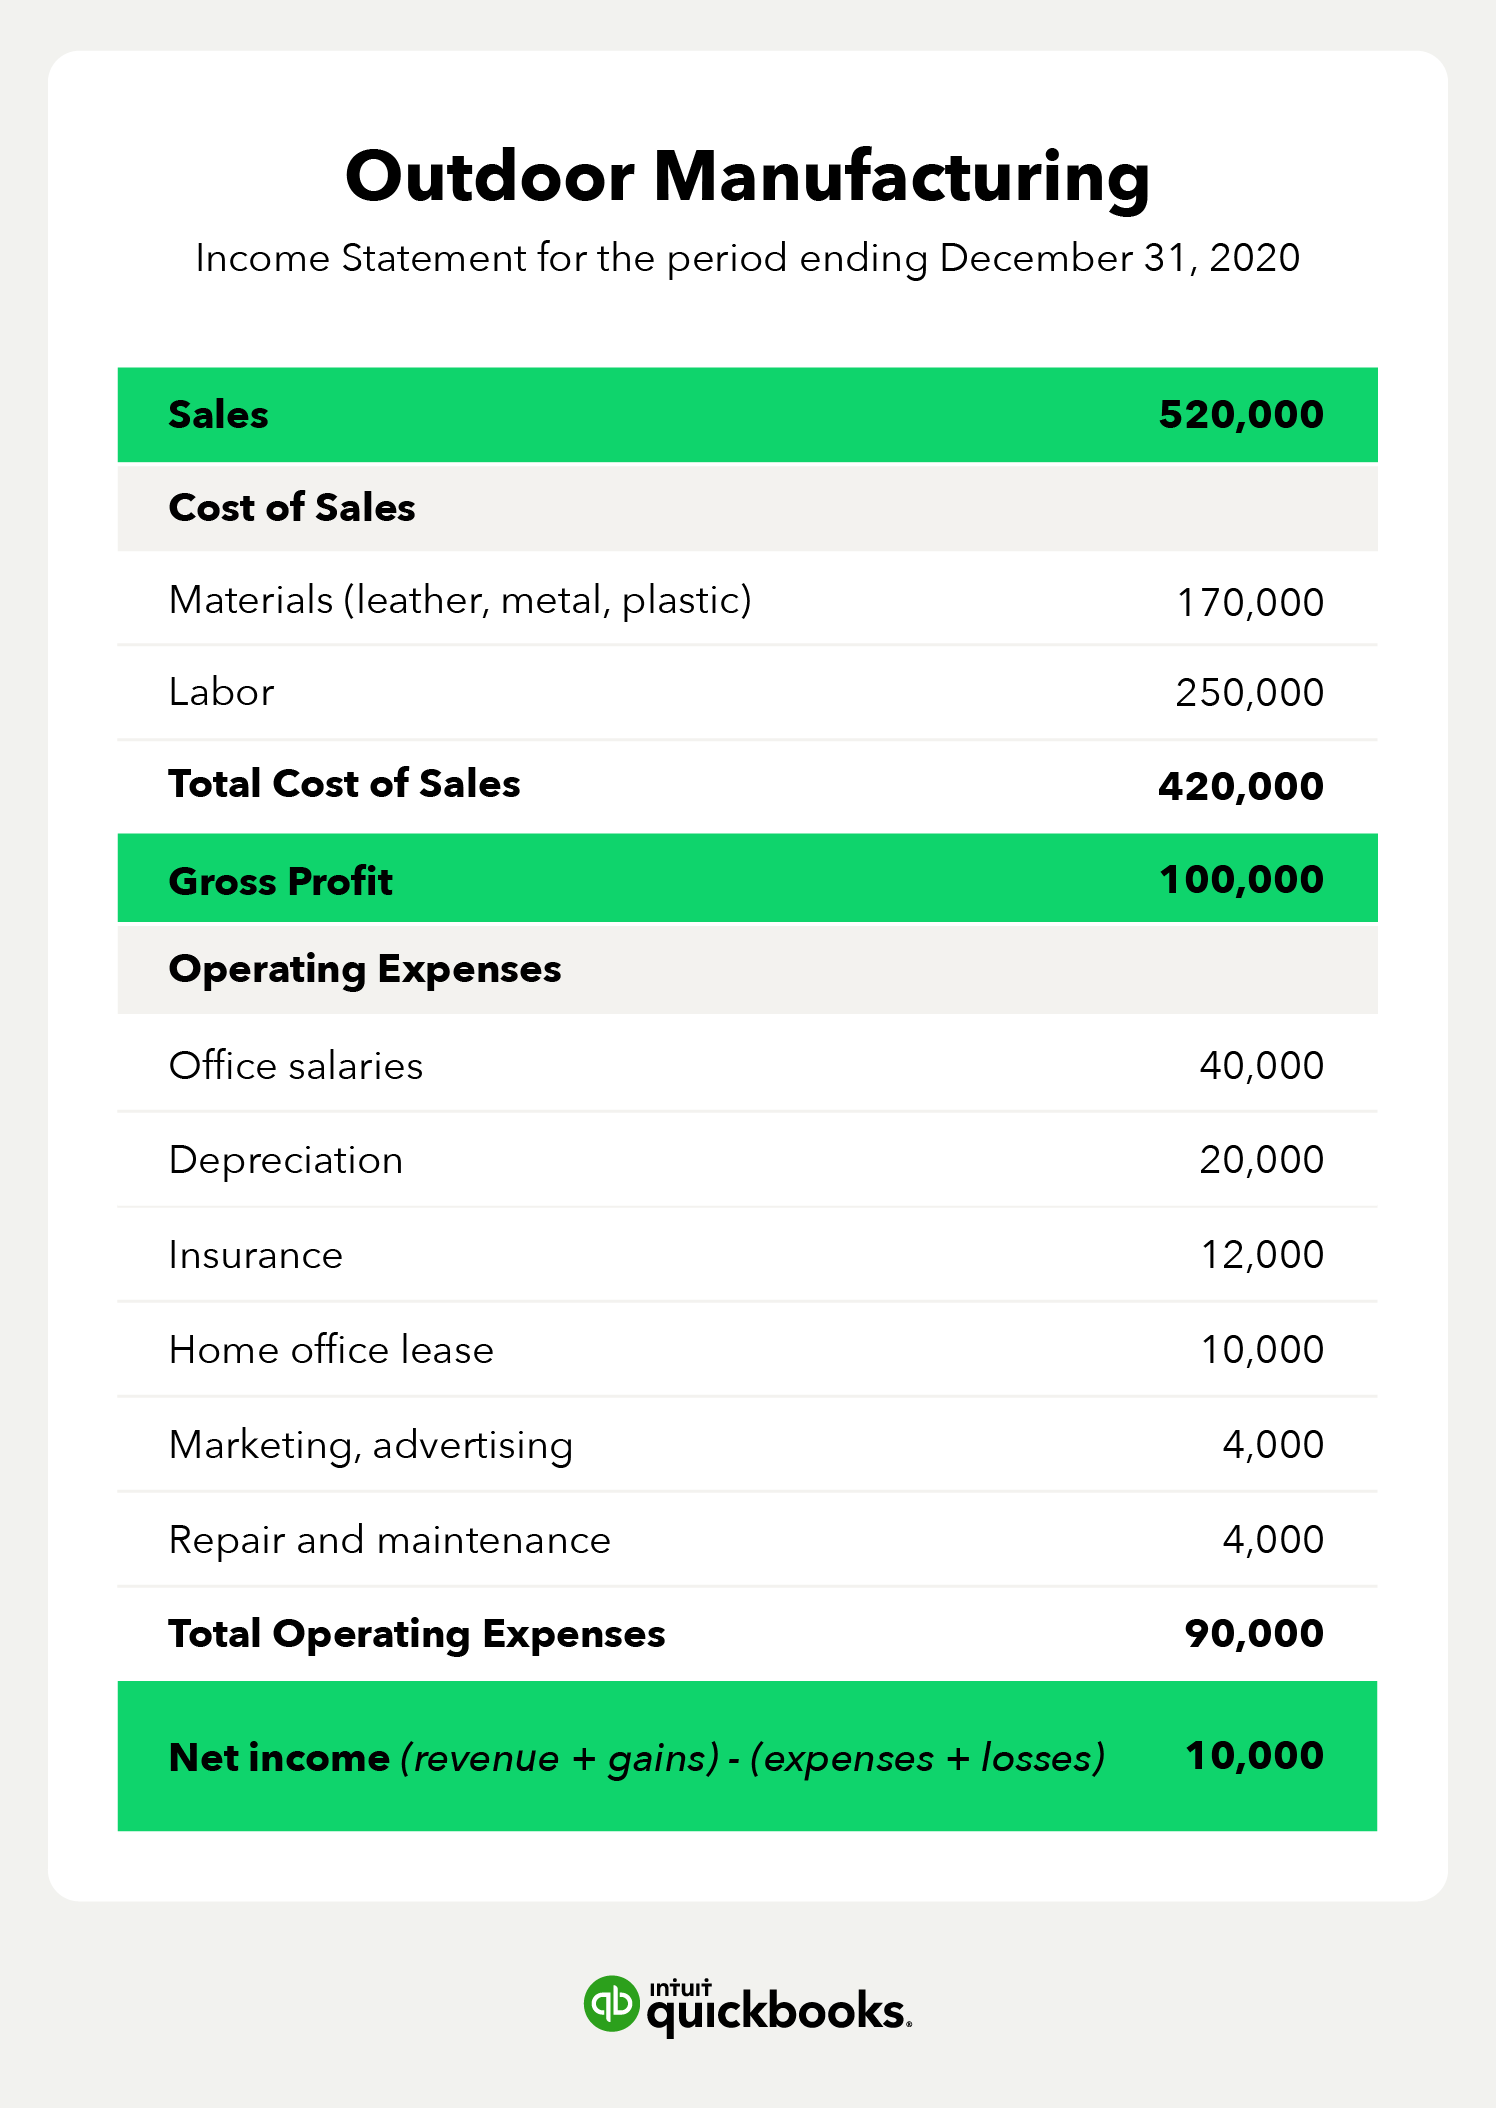 Outdoor manufacturing income statement